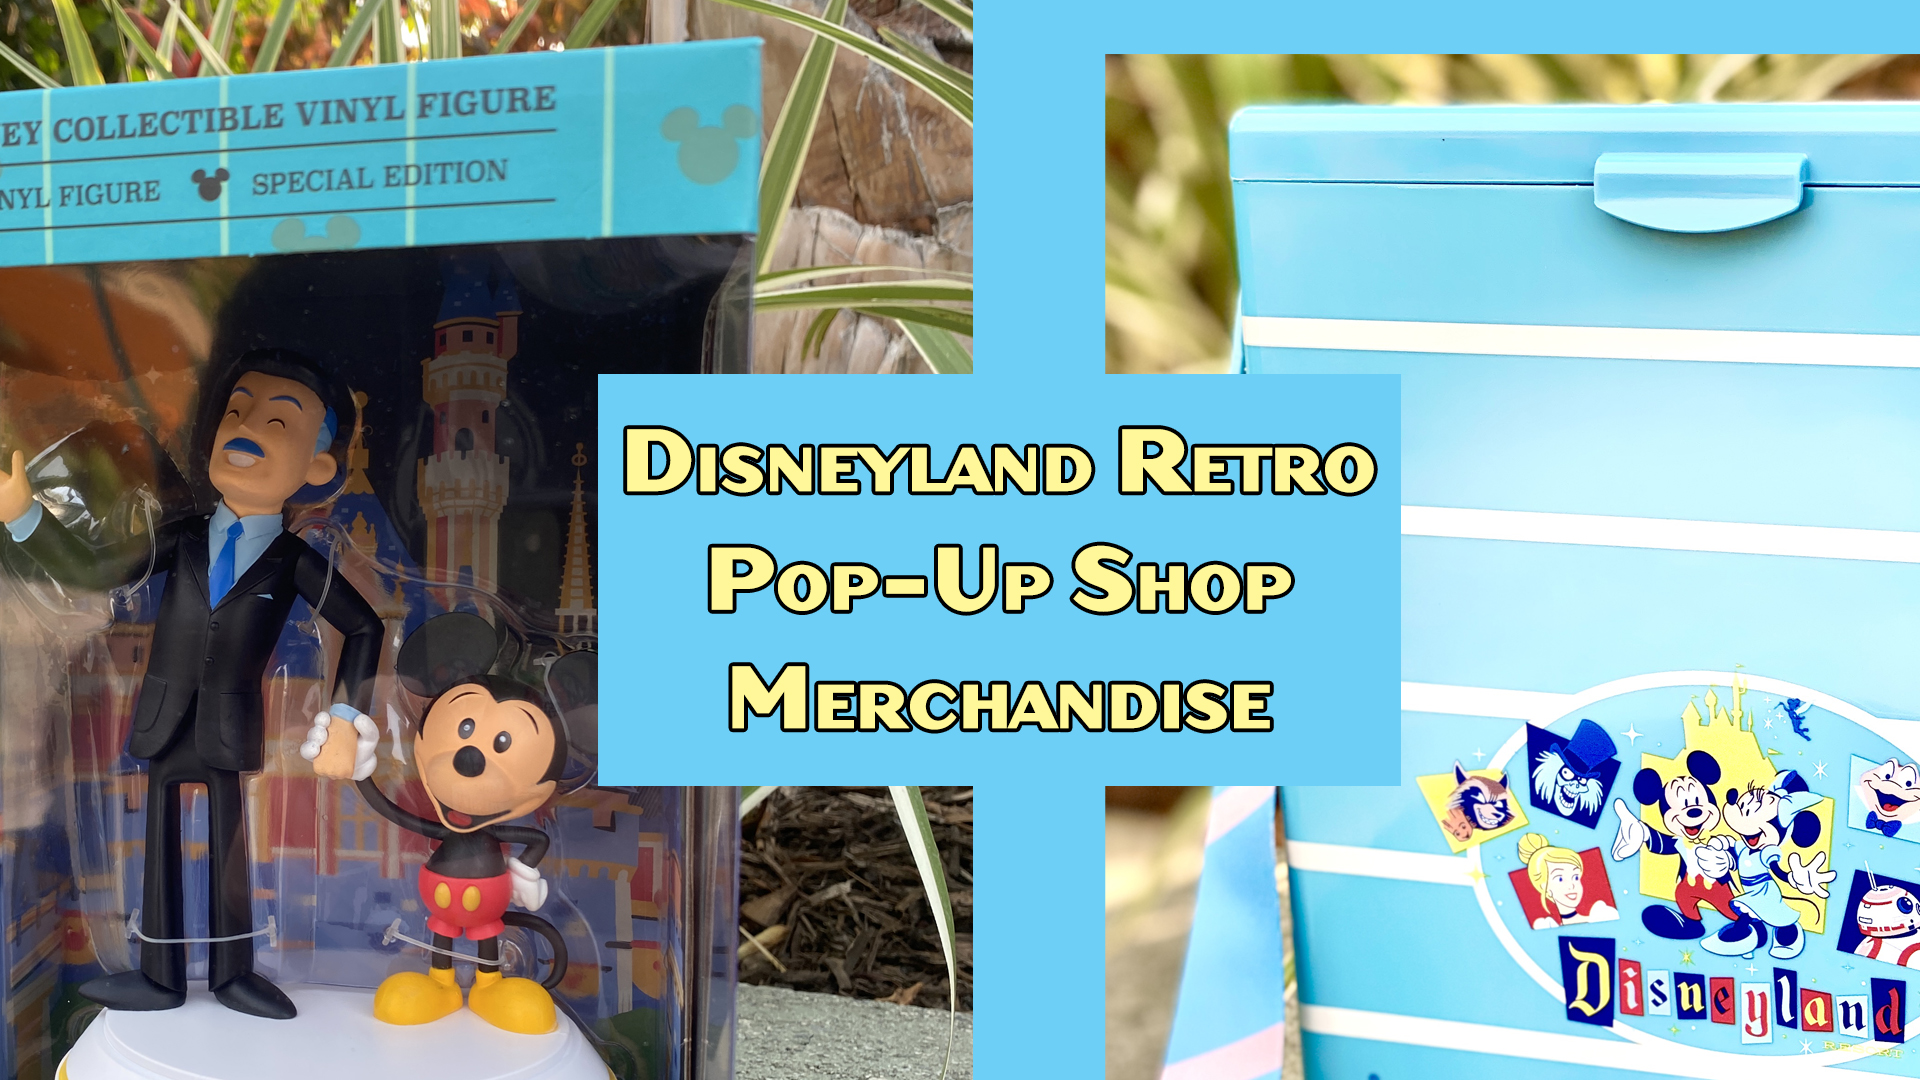 More Disneyland 65th Anniversary in the Pop Up Shop Shows Off Retro Items